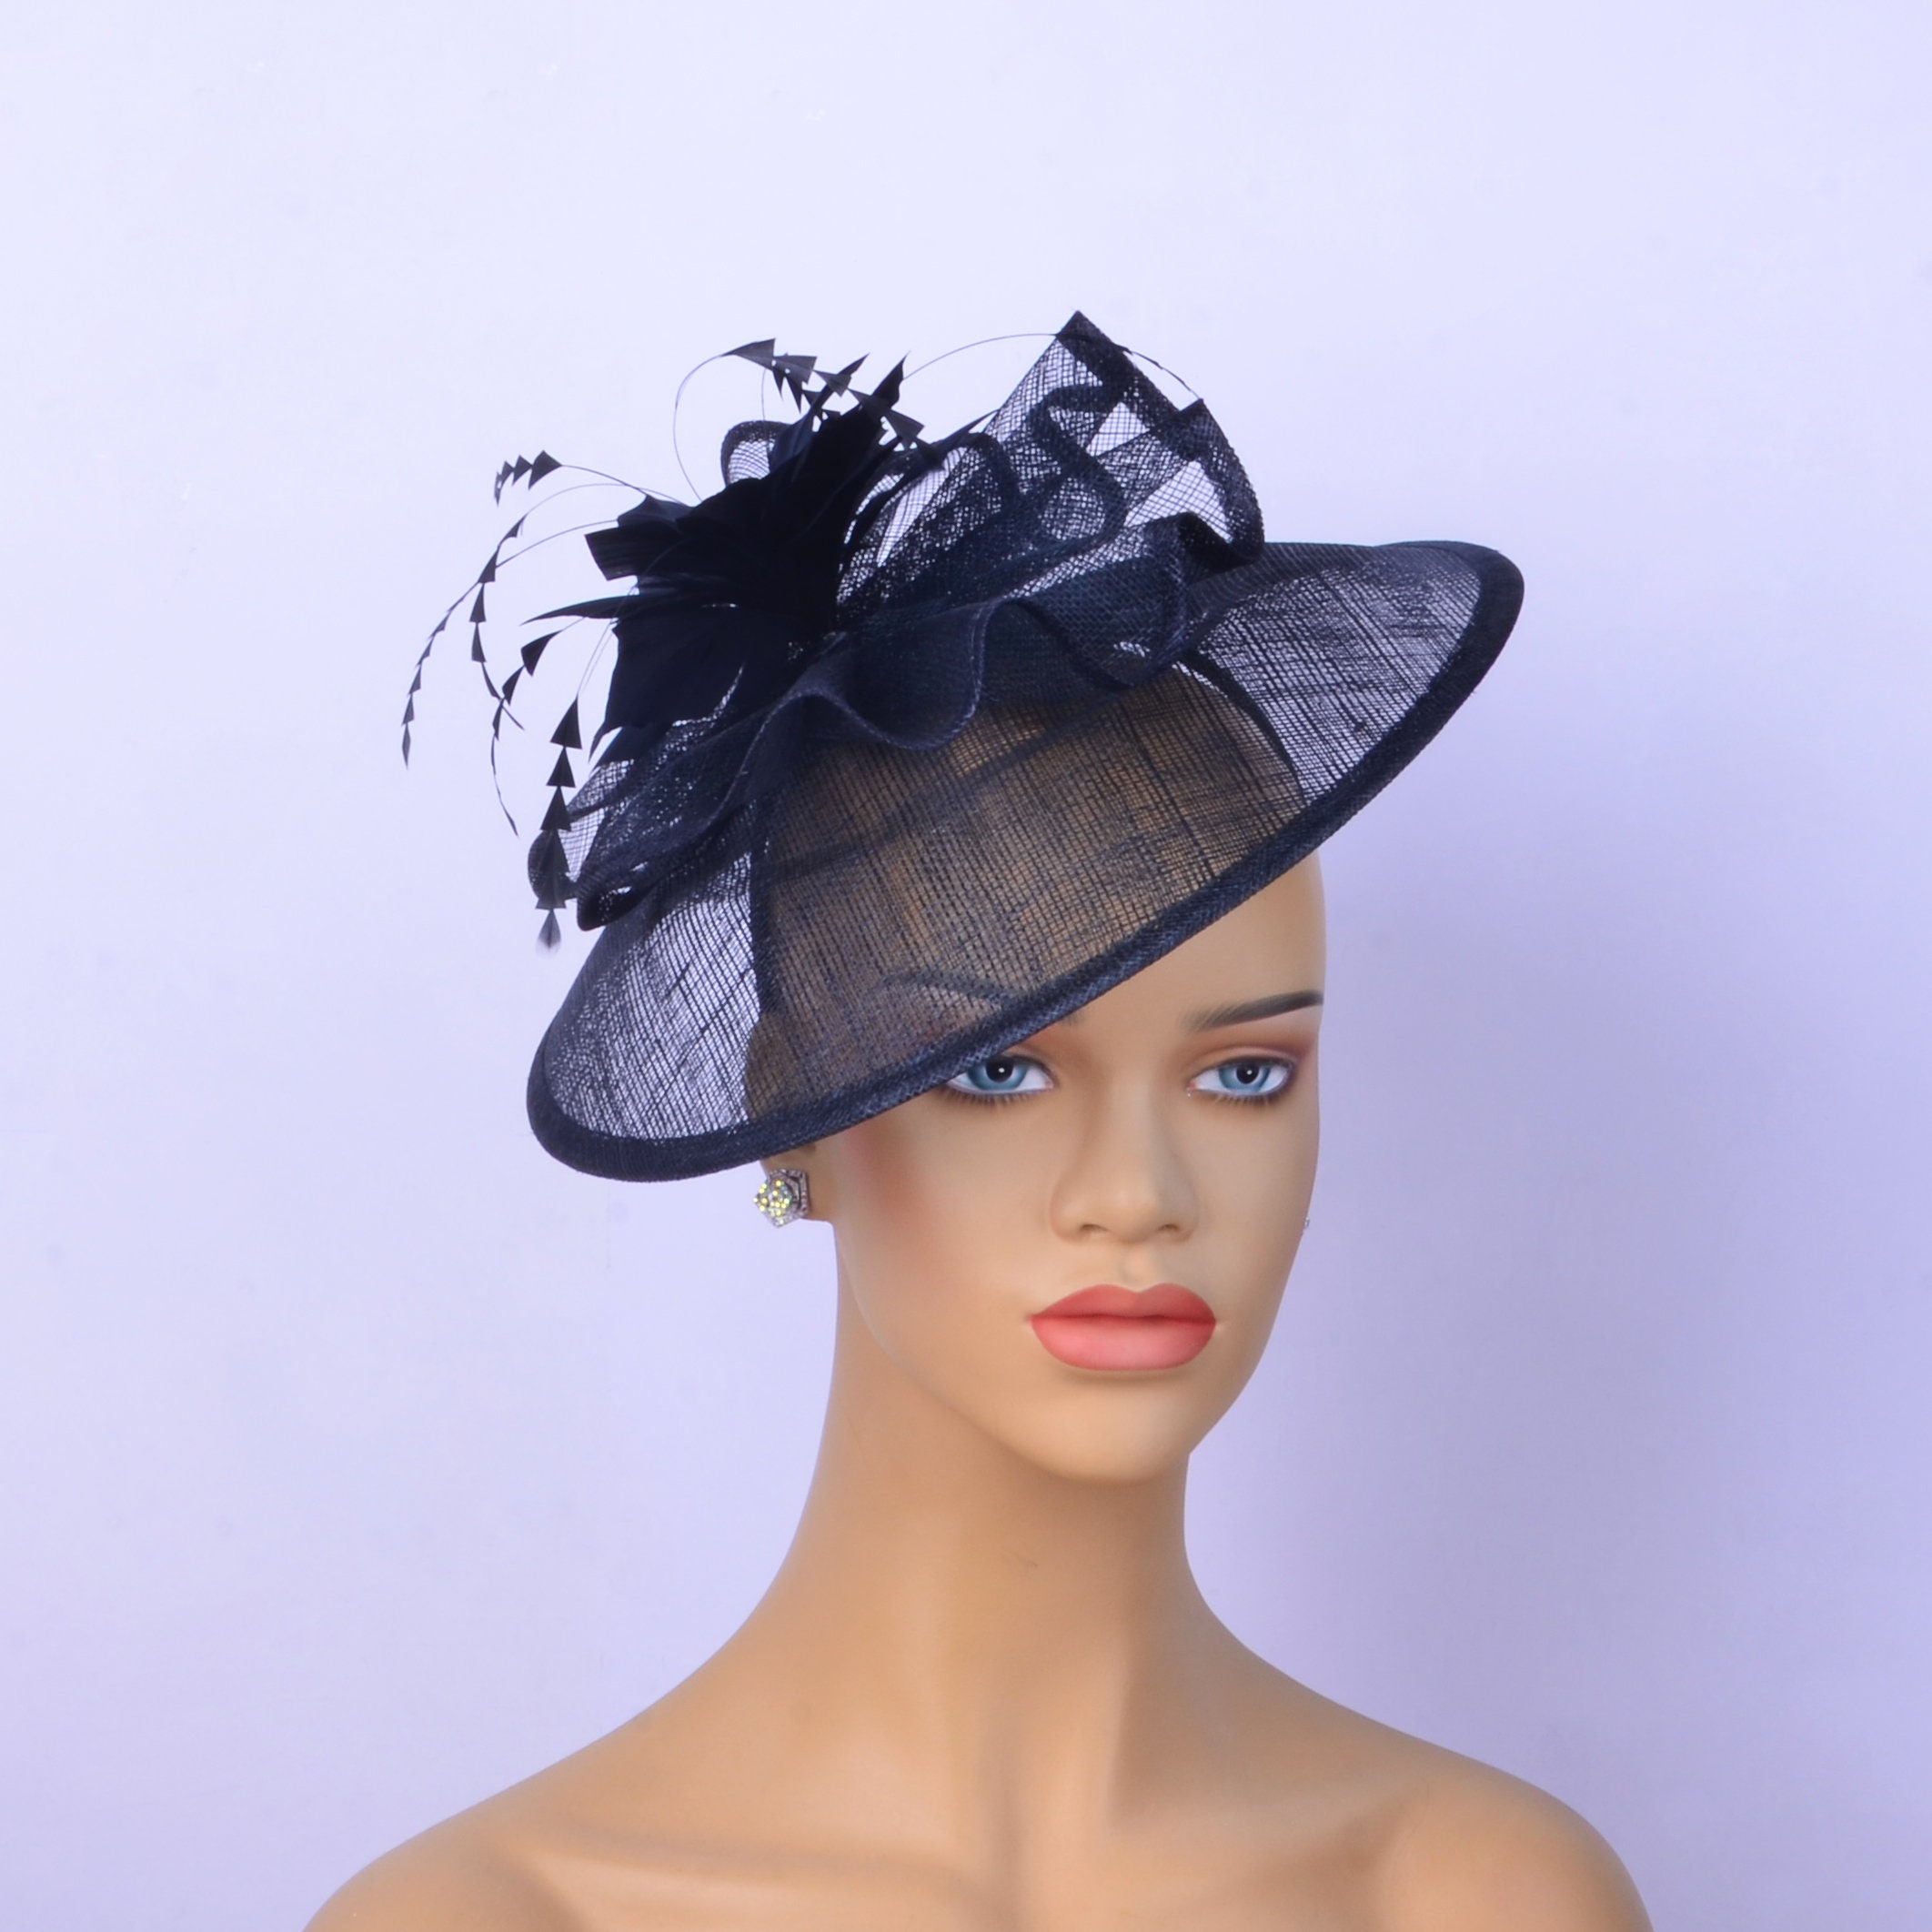 New Sinamay fascinator,fascinator,Party Hat,Church Hat,Melbourne  cup,Kentucky Derby,Fancy Hat,wedding hat,tea party hat,bride prom gifts.